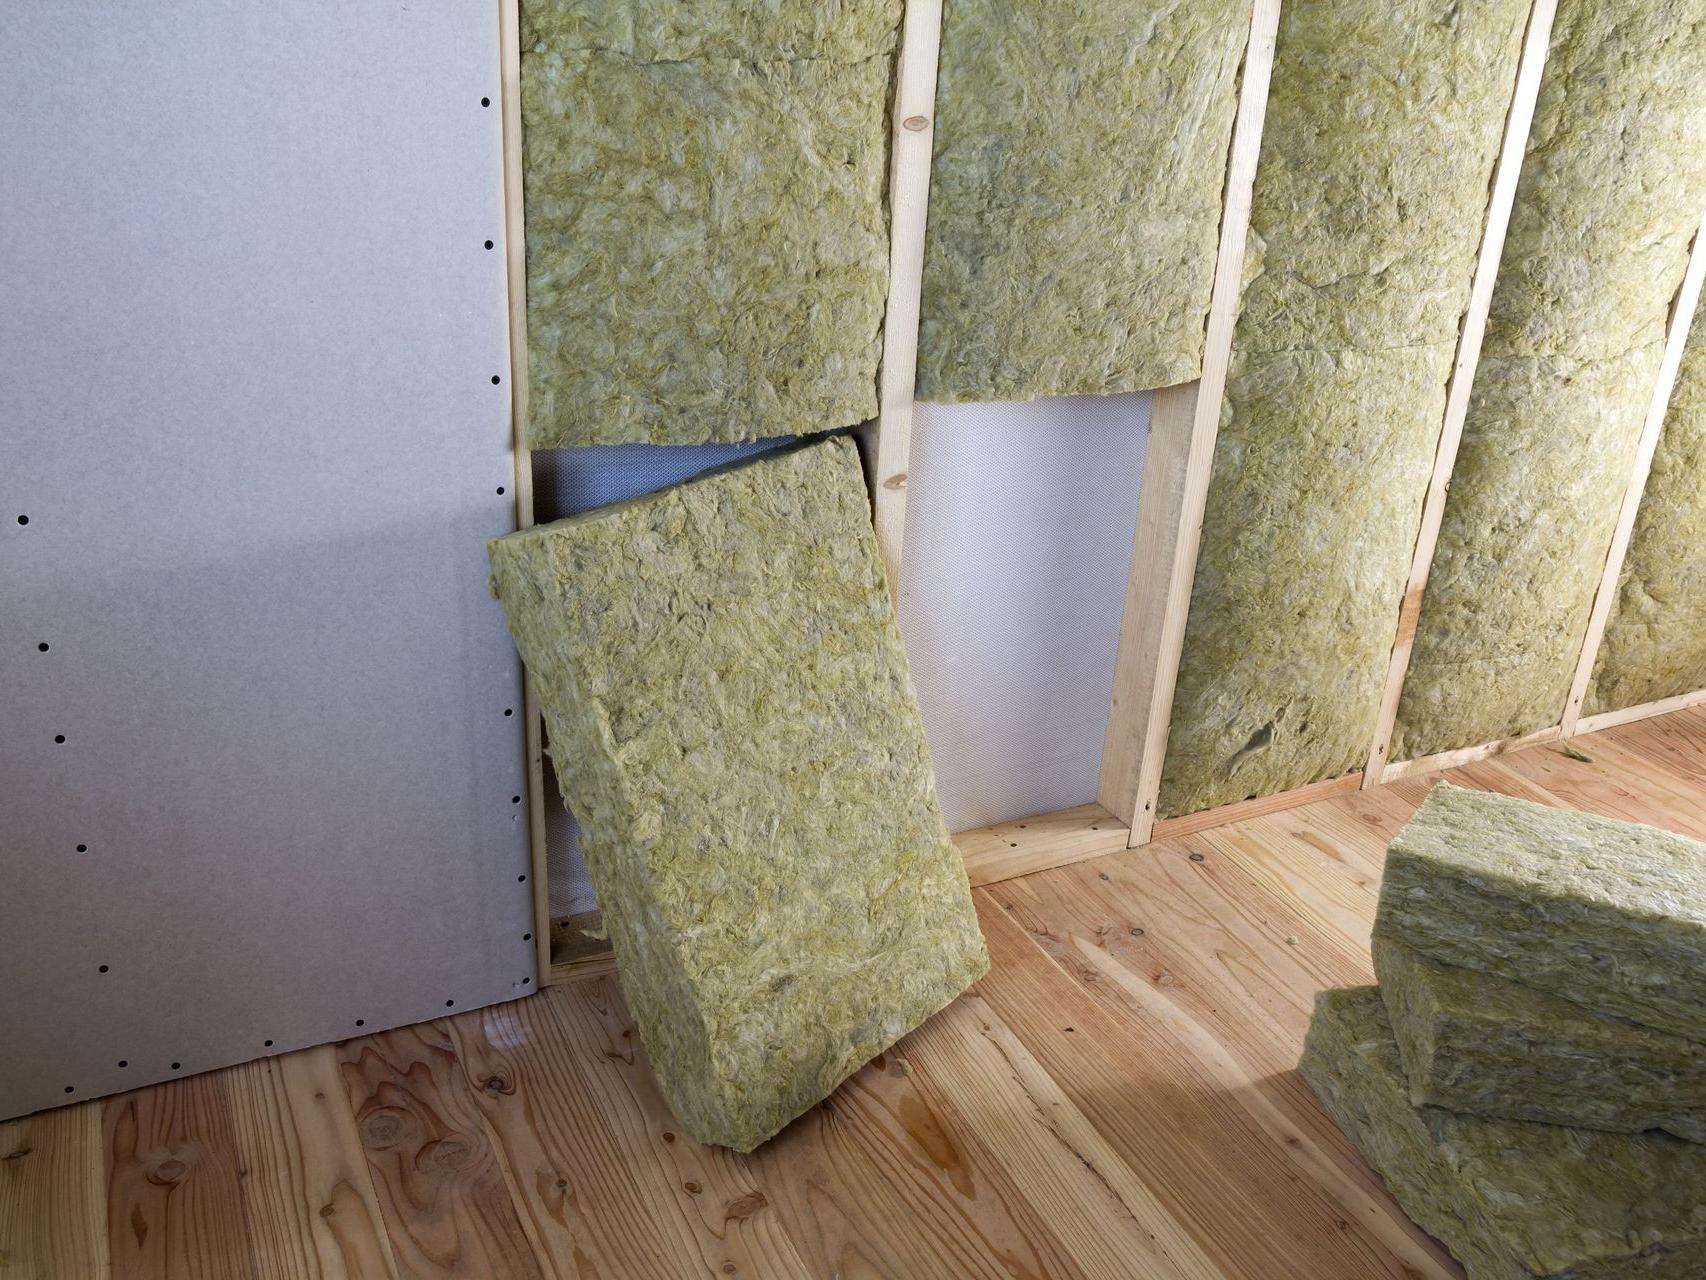 Insulating your home to keep it warm